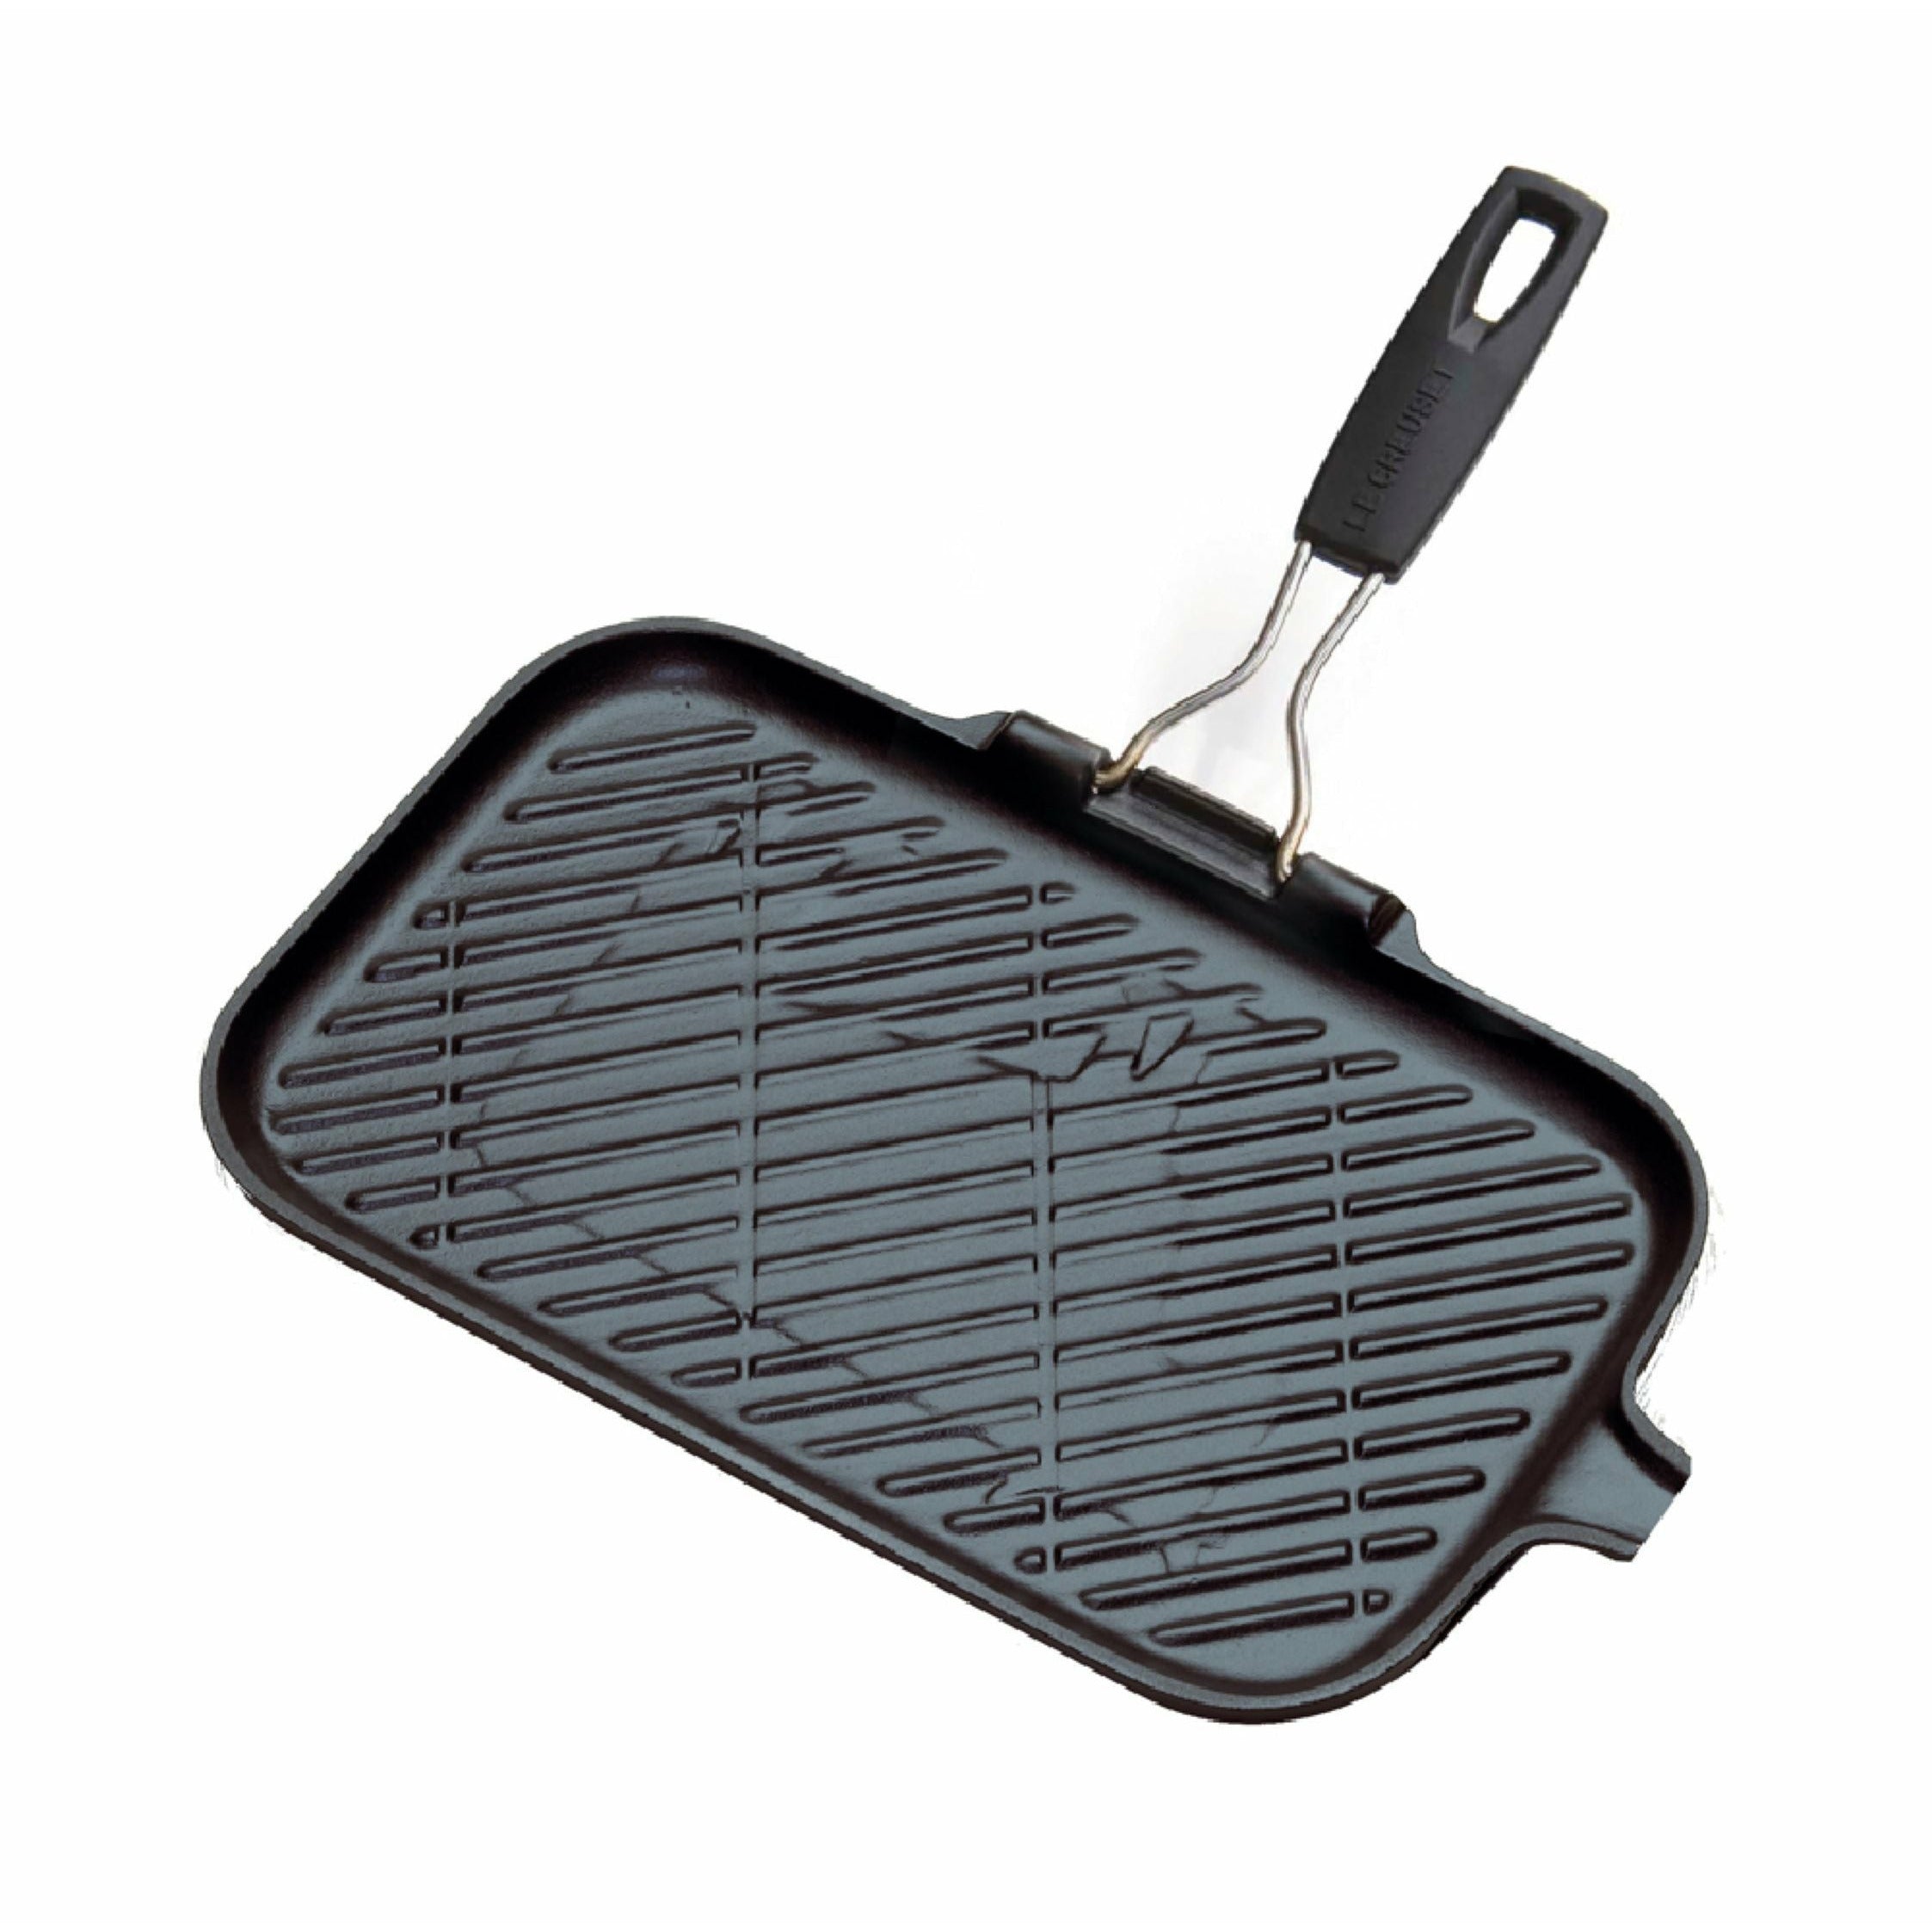 Le Creuset Tradition Rectangular Grill Pan With Silicone Handle 36 X 20 Cm, Black